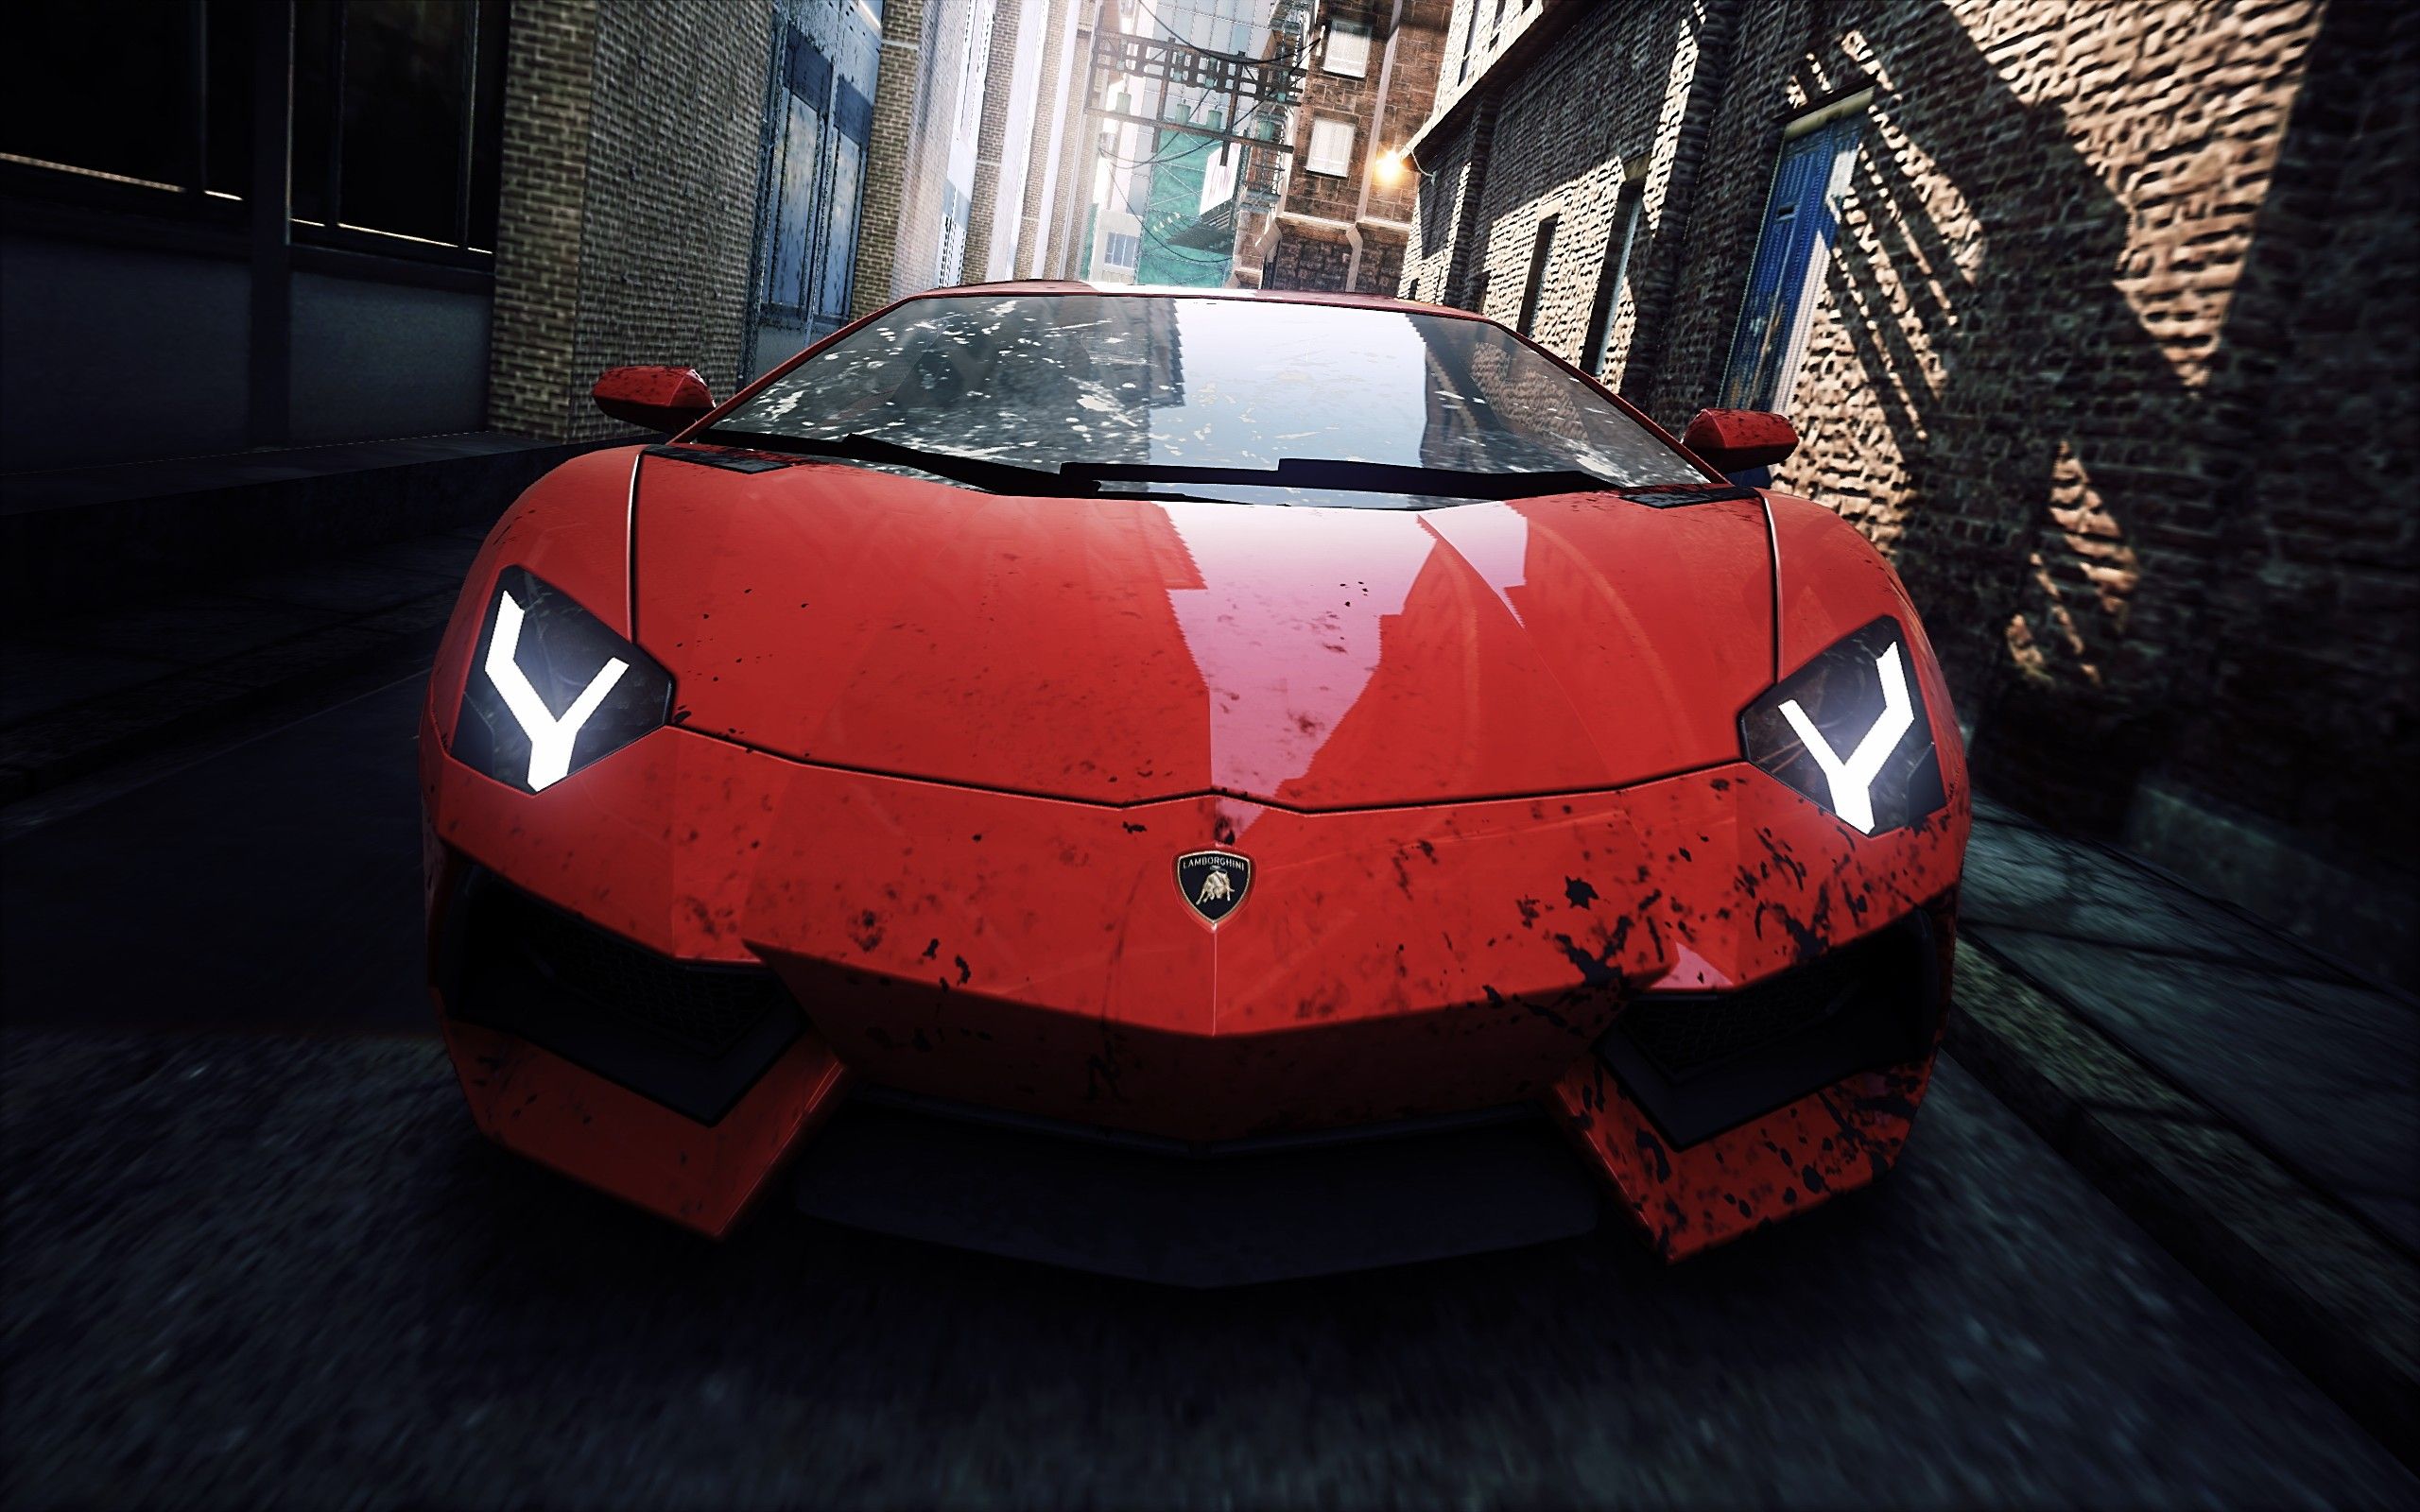 2560x1600px Nfs Most Wanted 2012 (630.78 KB).09.2015